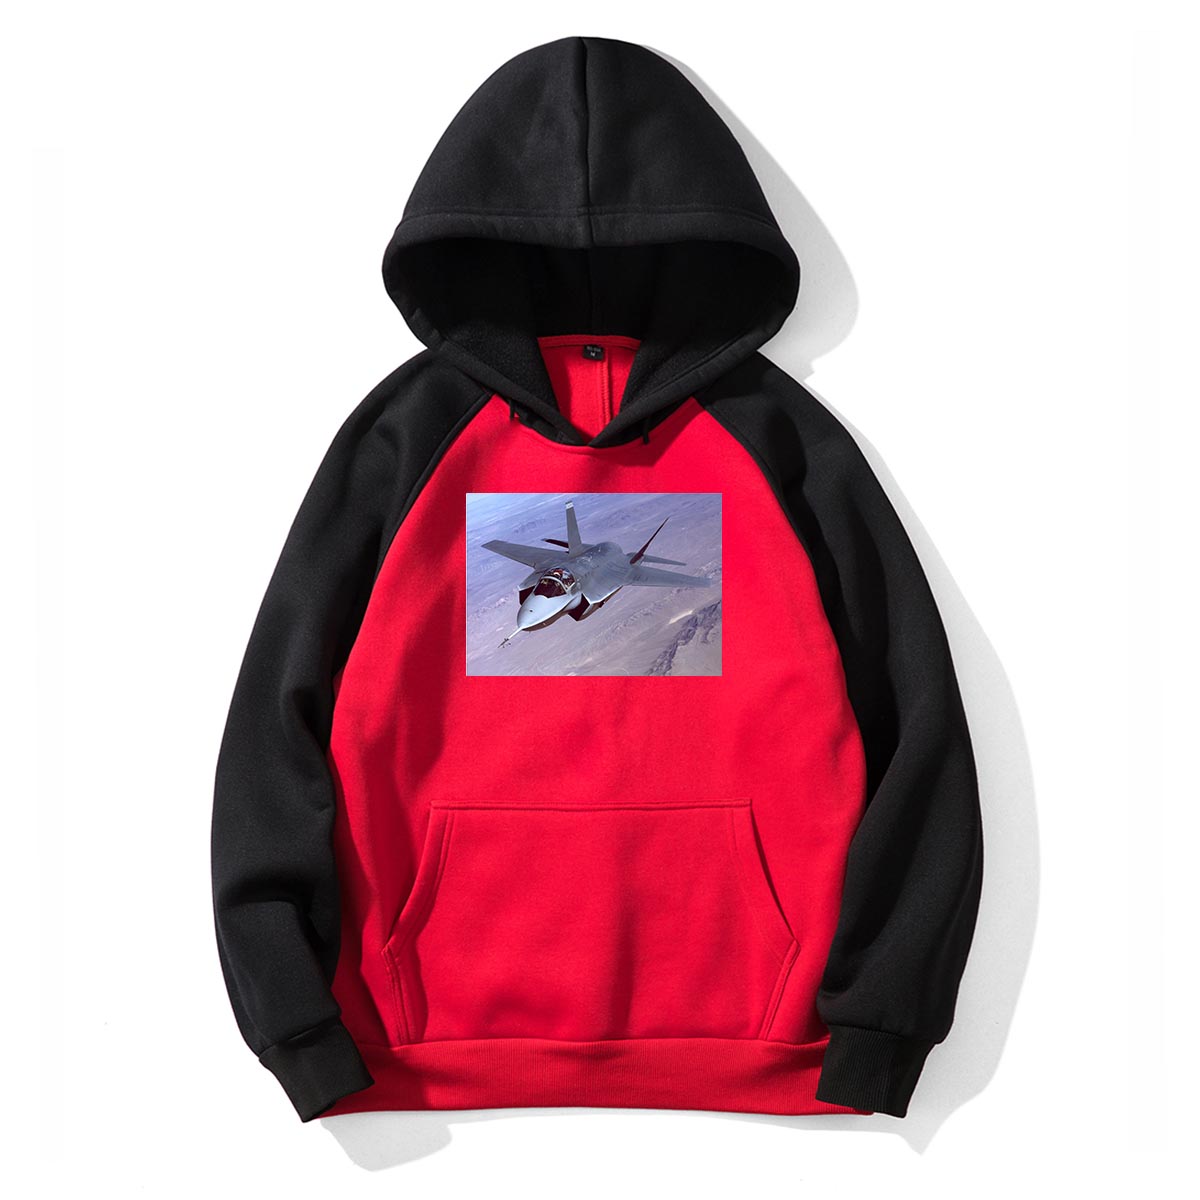 Fighting Falcon F35 Captured in the Air Designed Colourful Hoodies